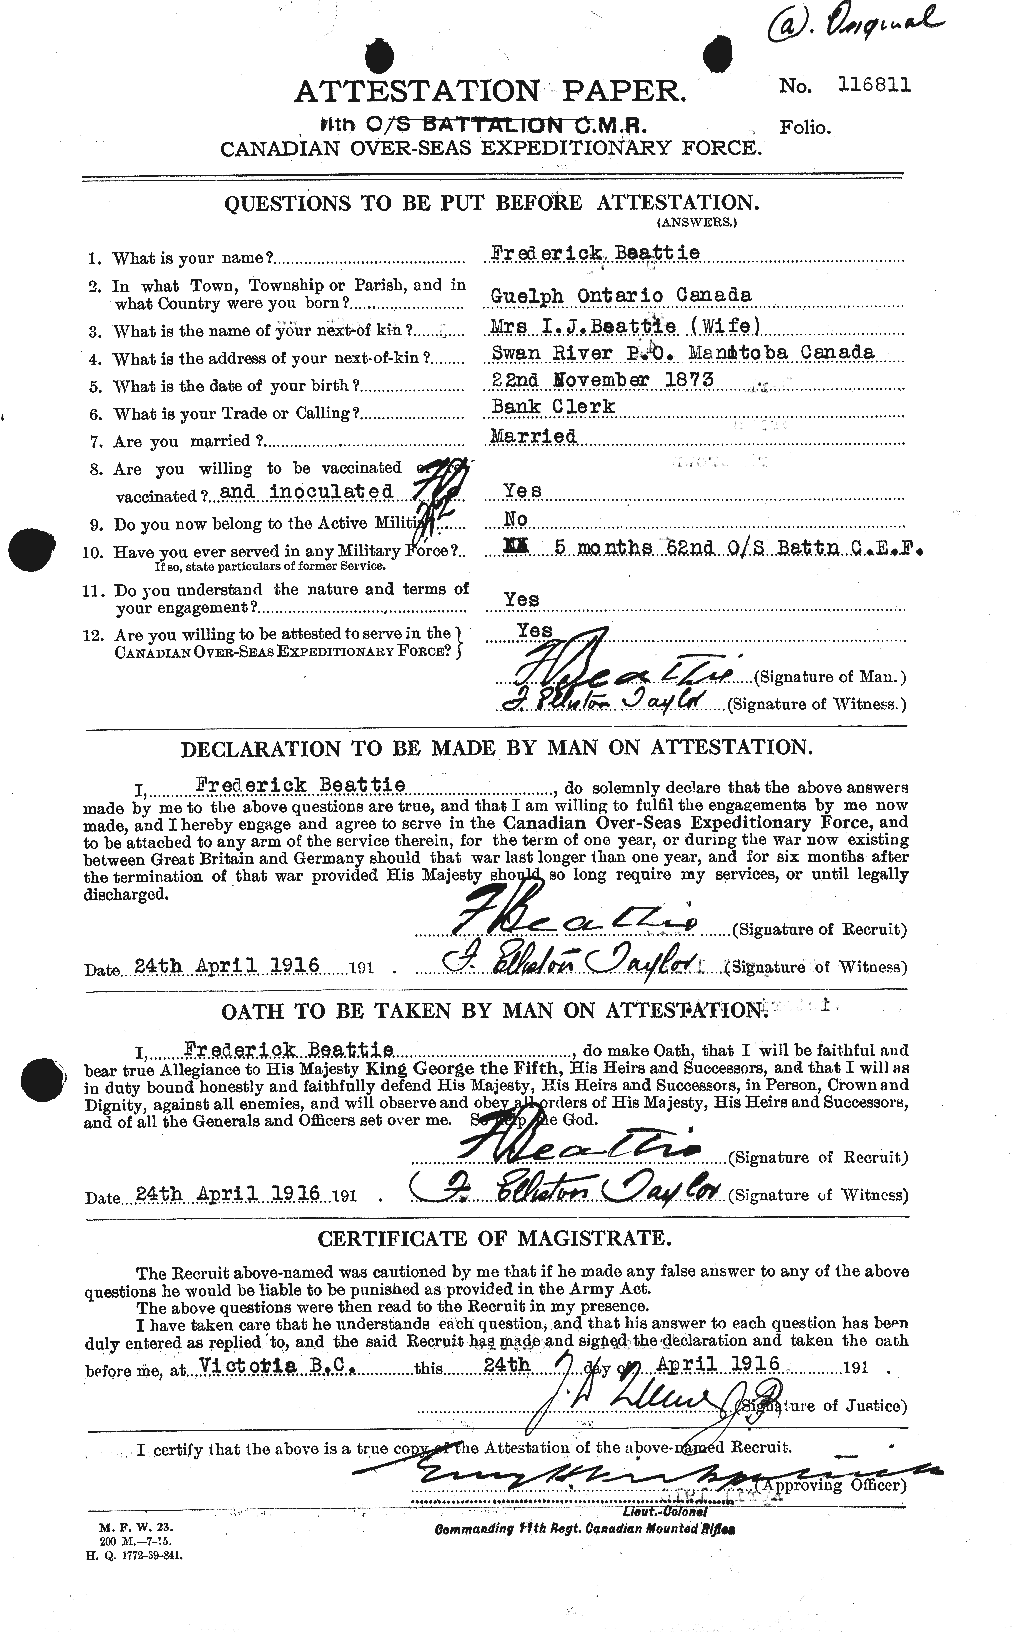 Personnel Records of the First World War - CEF 230688a